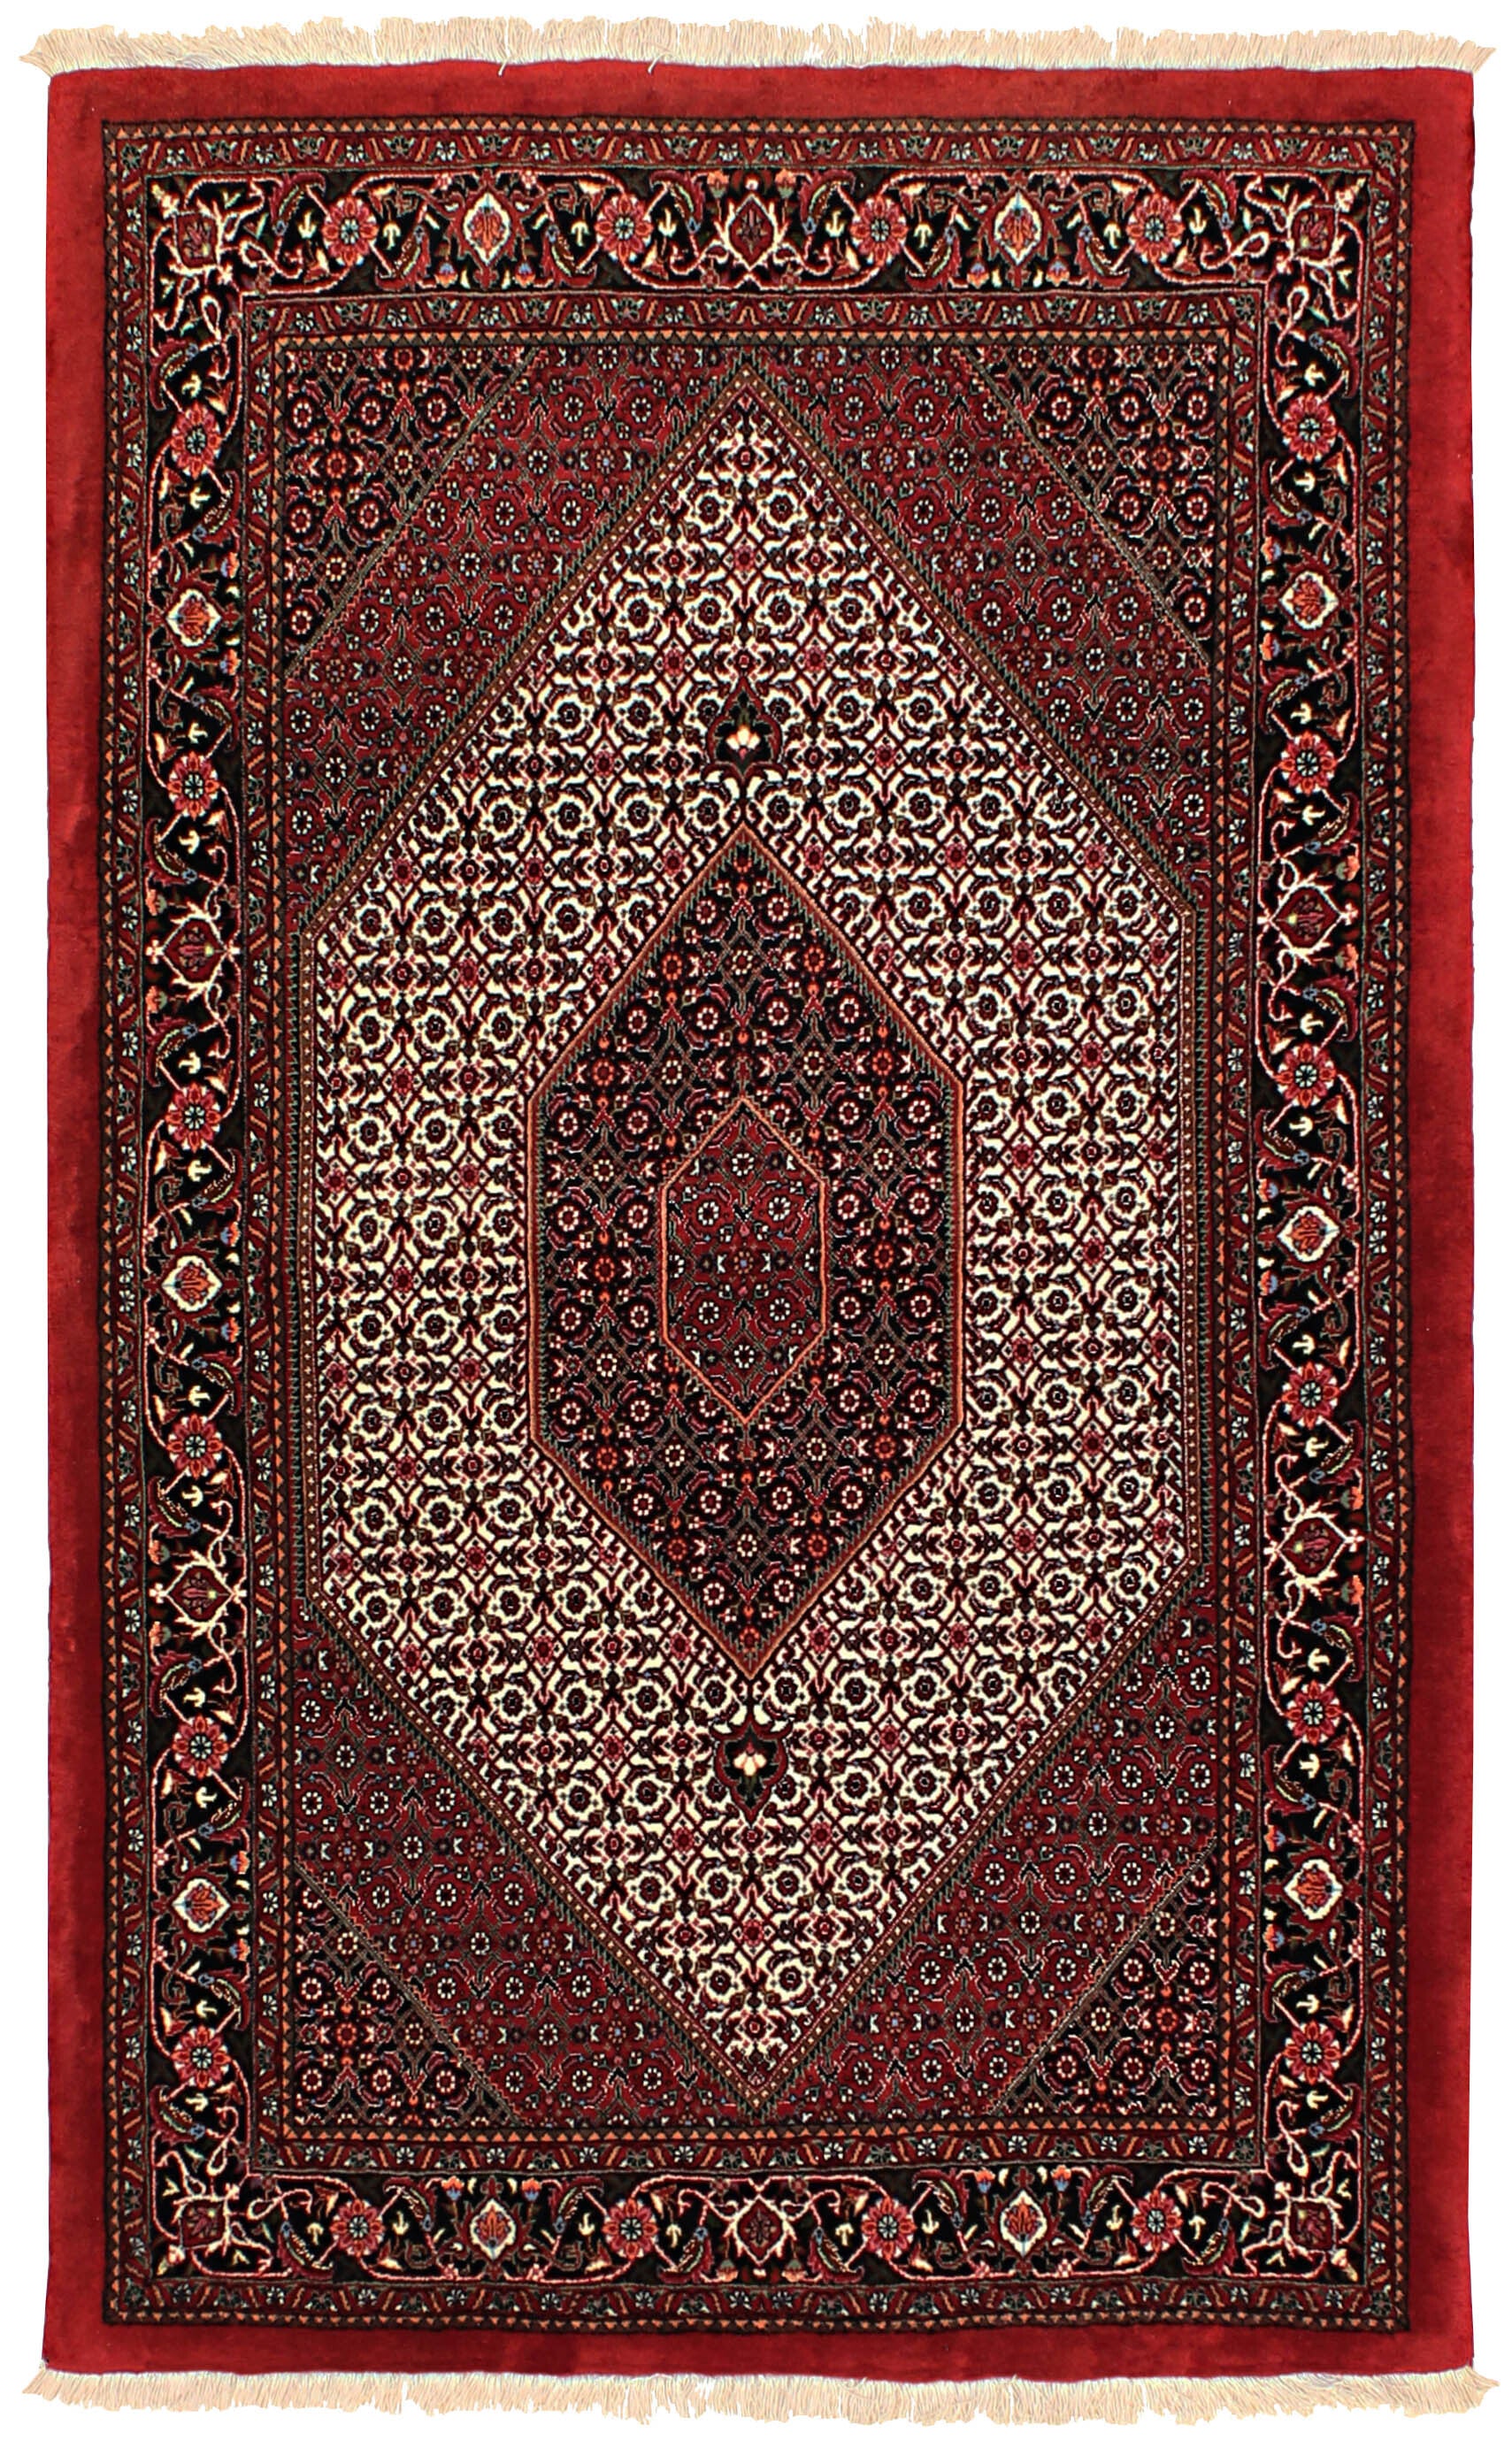 Red and cream persian rug with traditional floral design